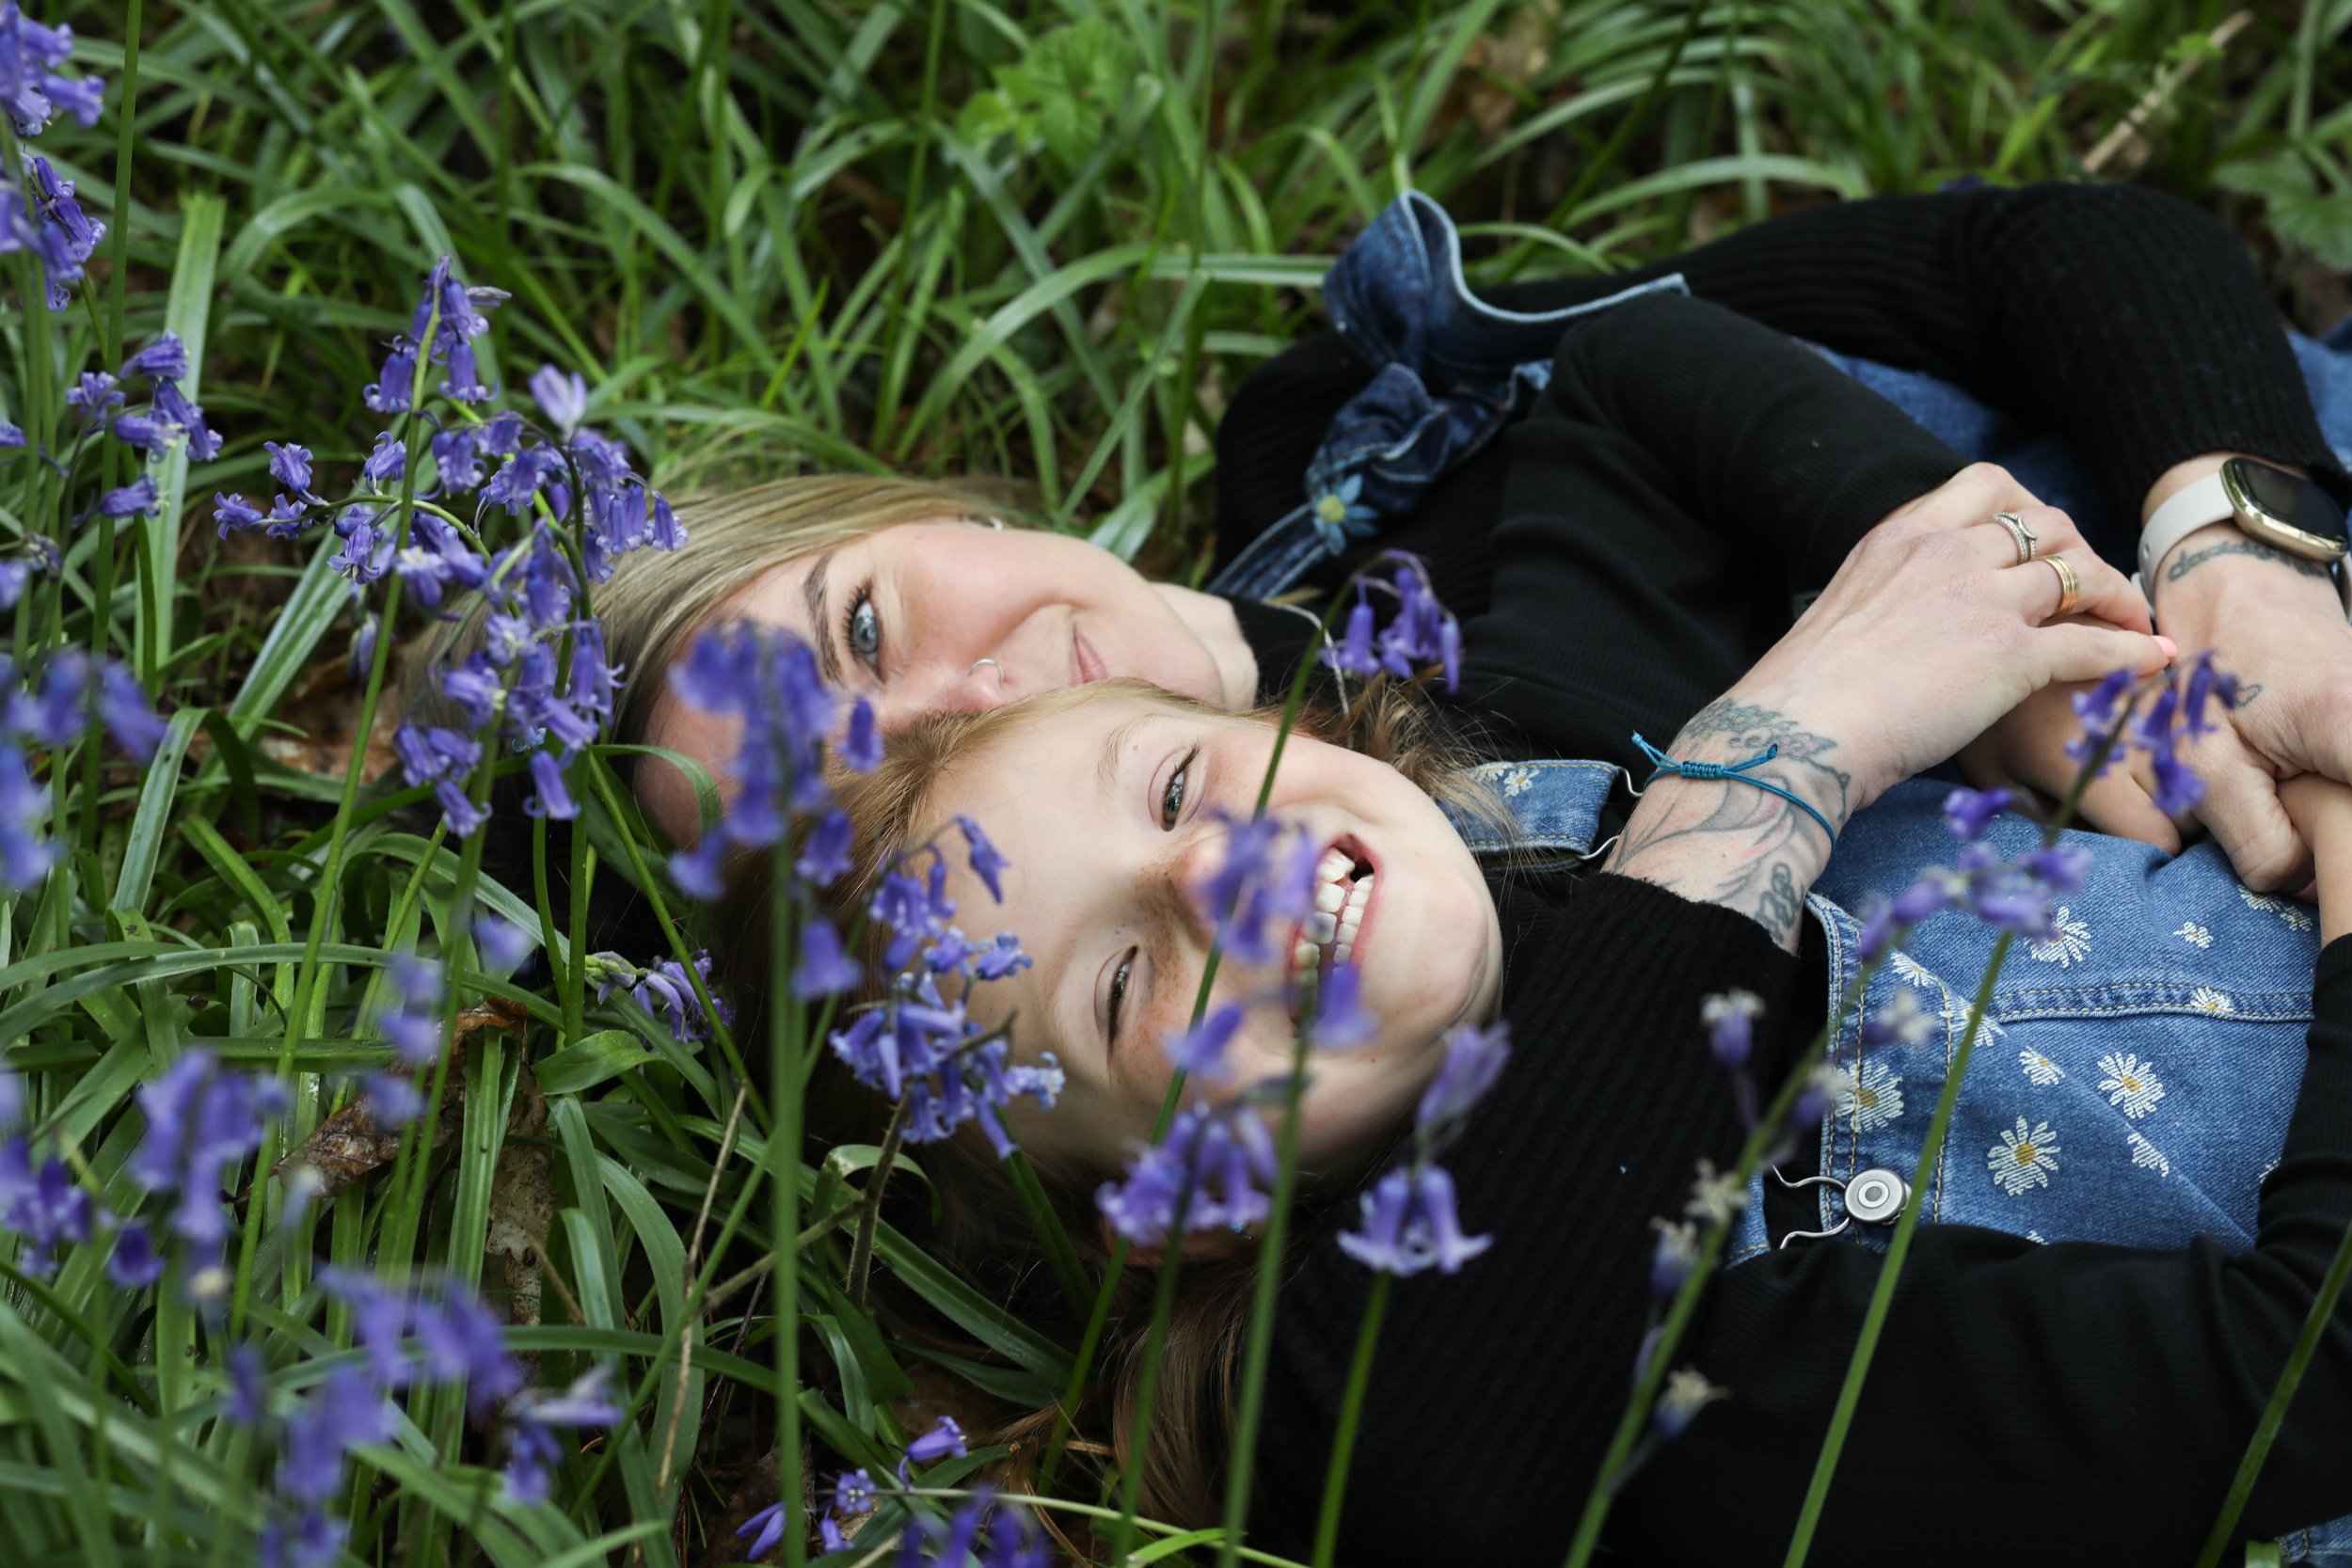 MUM AND DAUGHTER PHOTO SHOOT IN THE BLUEBELLS | BERKSHIRE PORTRAIT SHOOTS52 choice .JPG